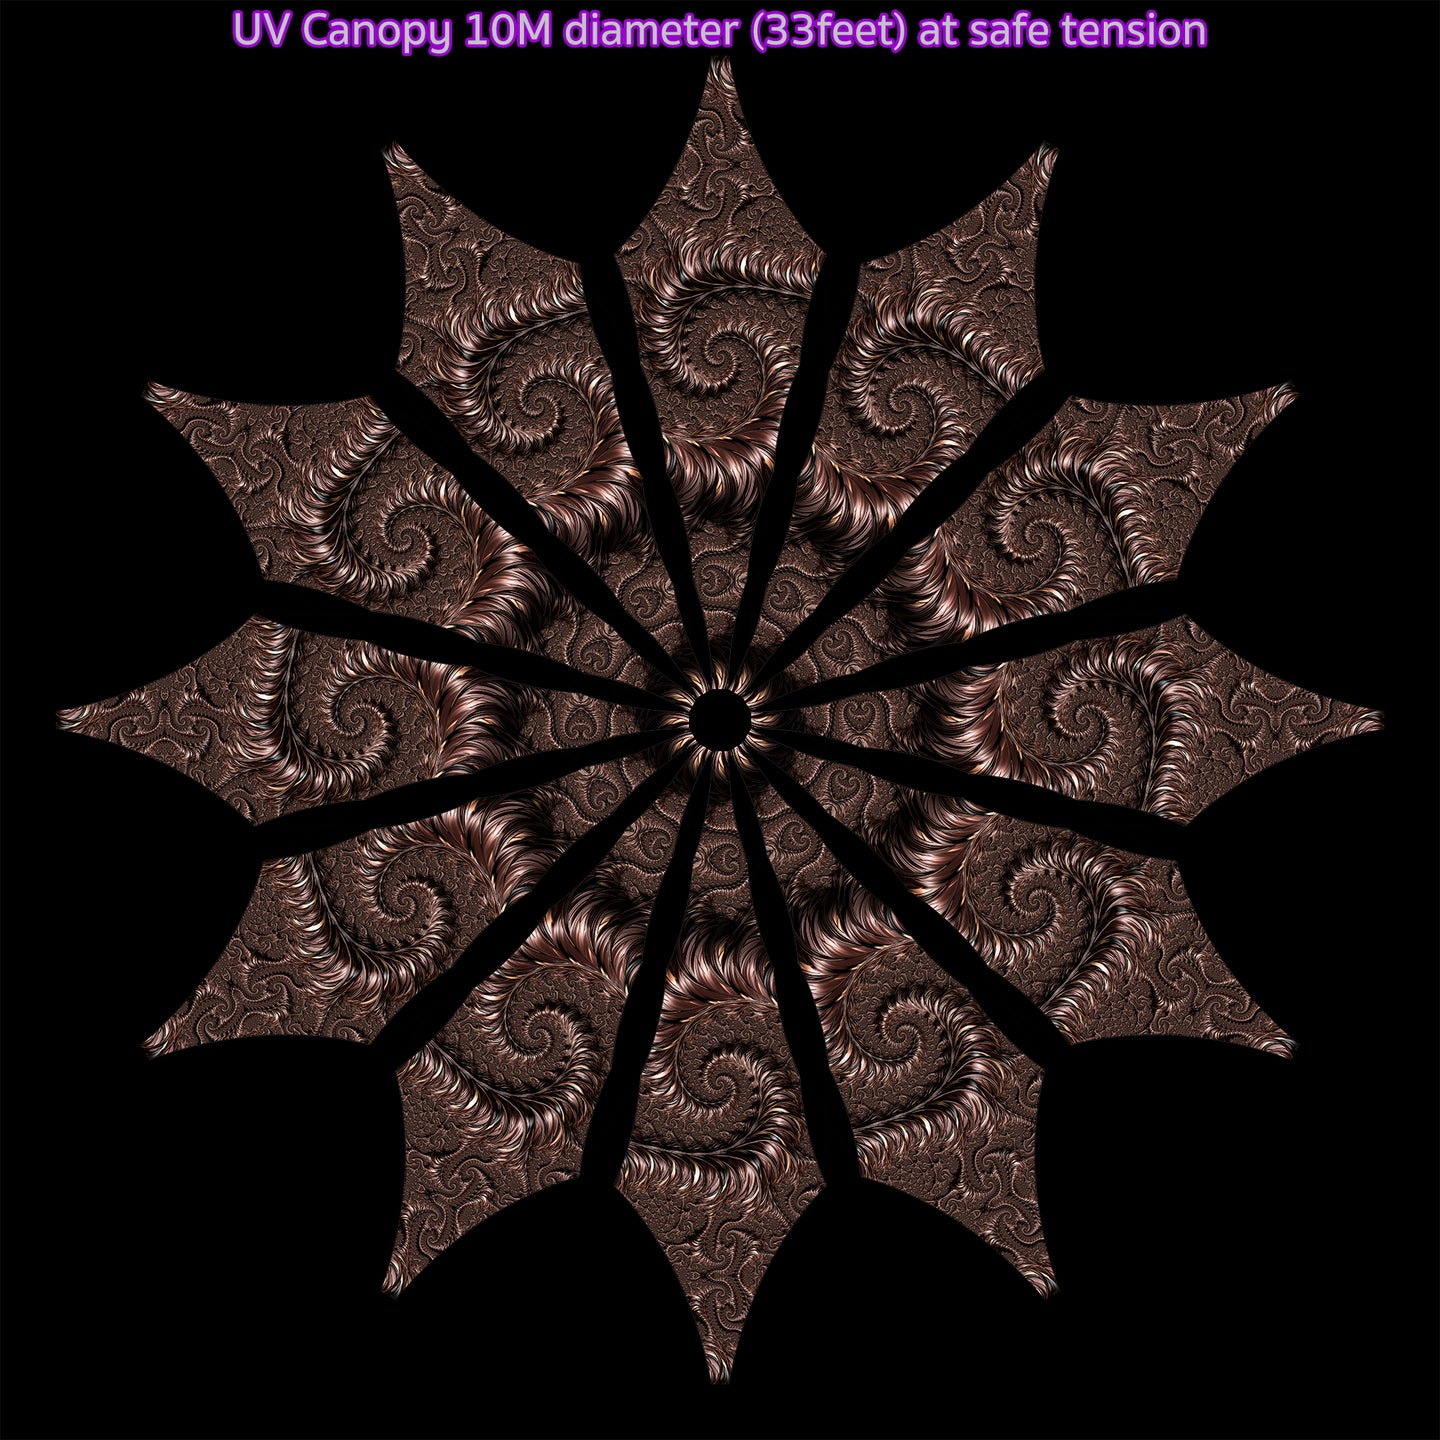 YV Psychedelic fractal party trippy canopy by Crealab108 Koh Pha Ngan